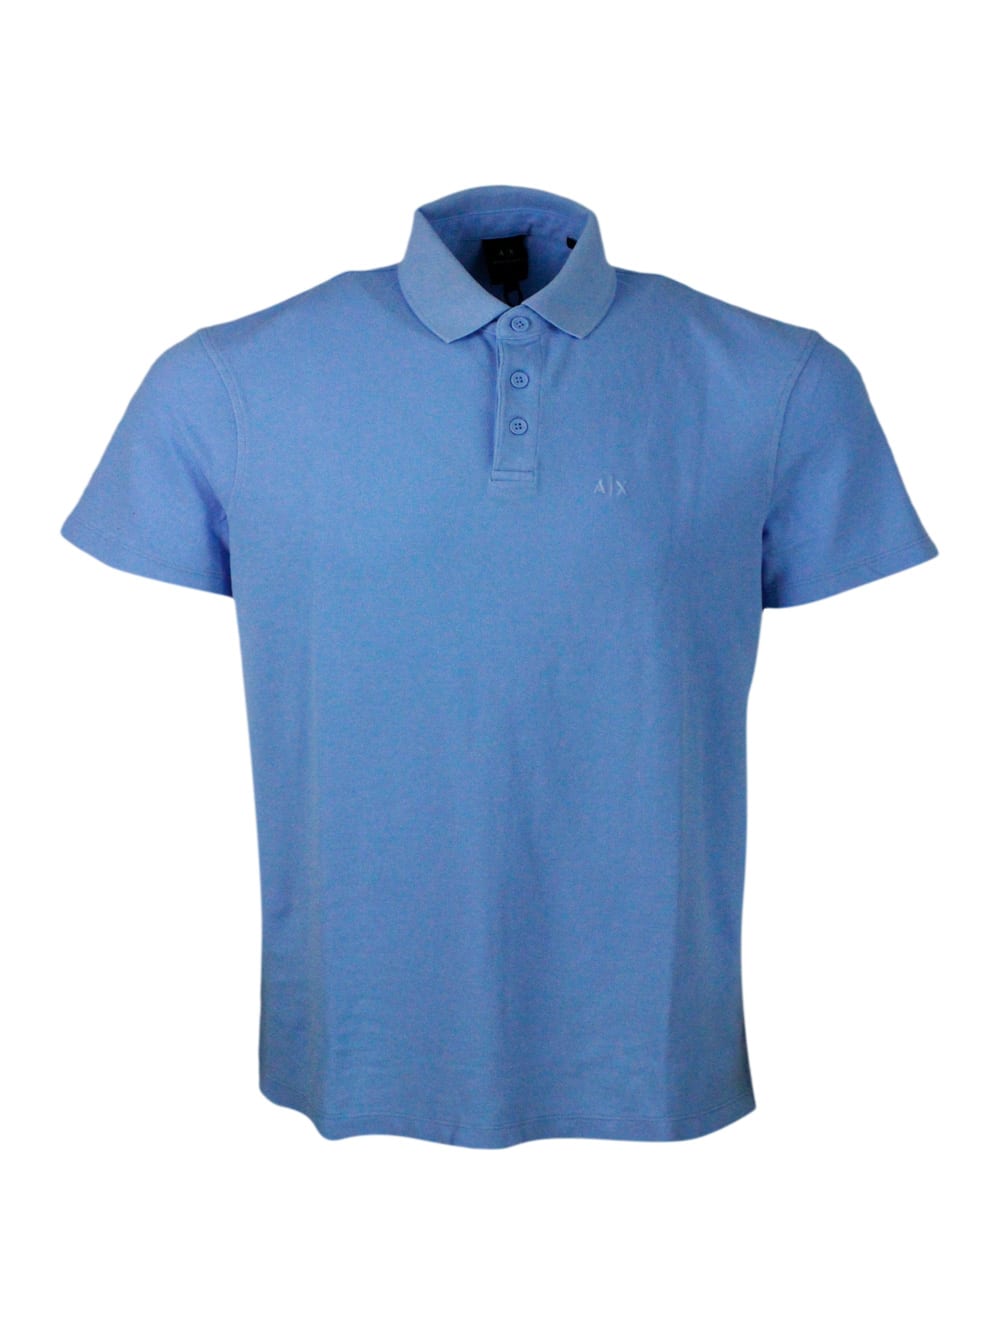 3-button Short-sleeved Pique Cotton Polo Shirt With Logo Embroidered On The Chest